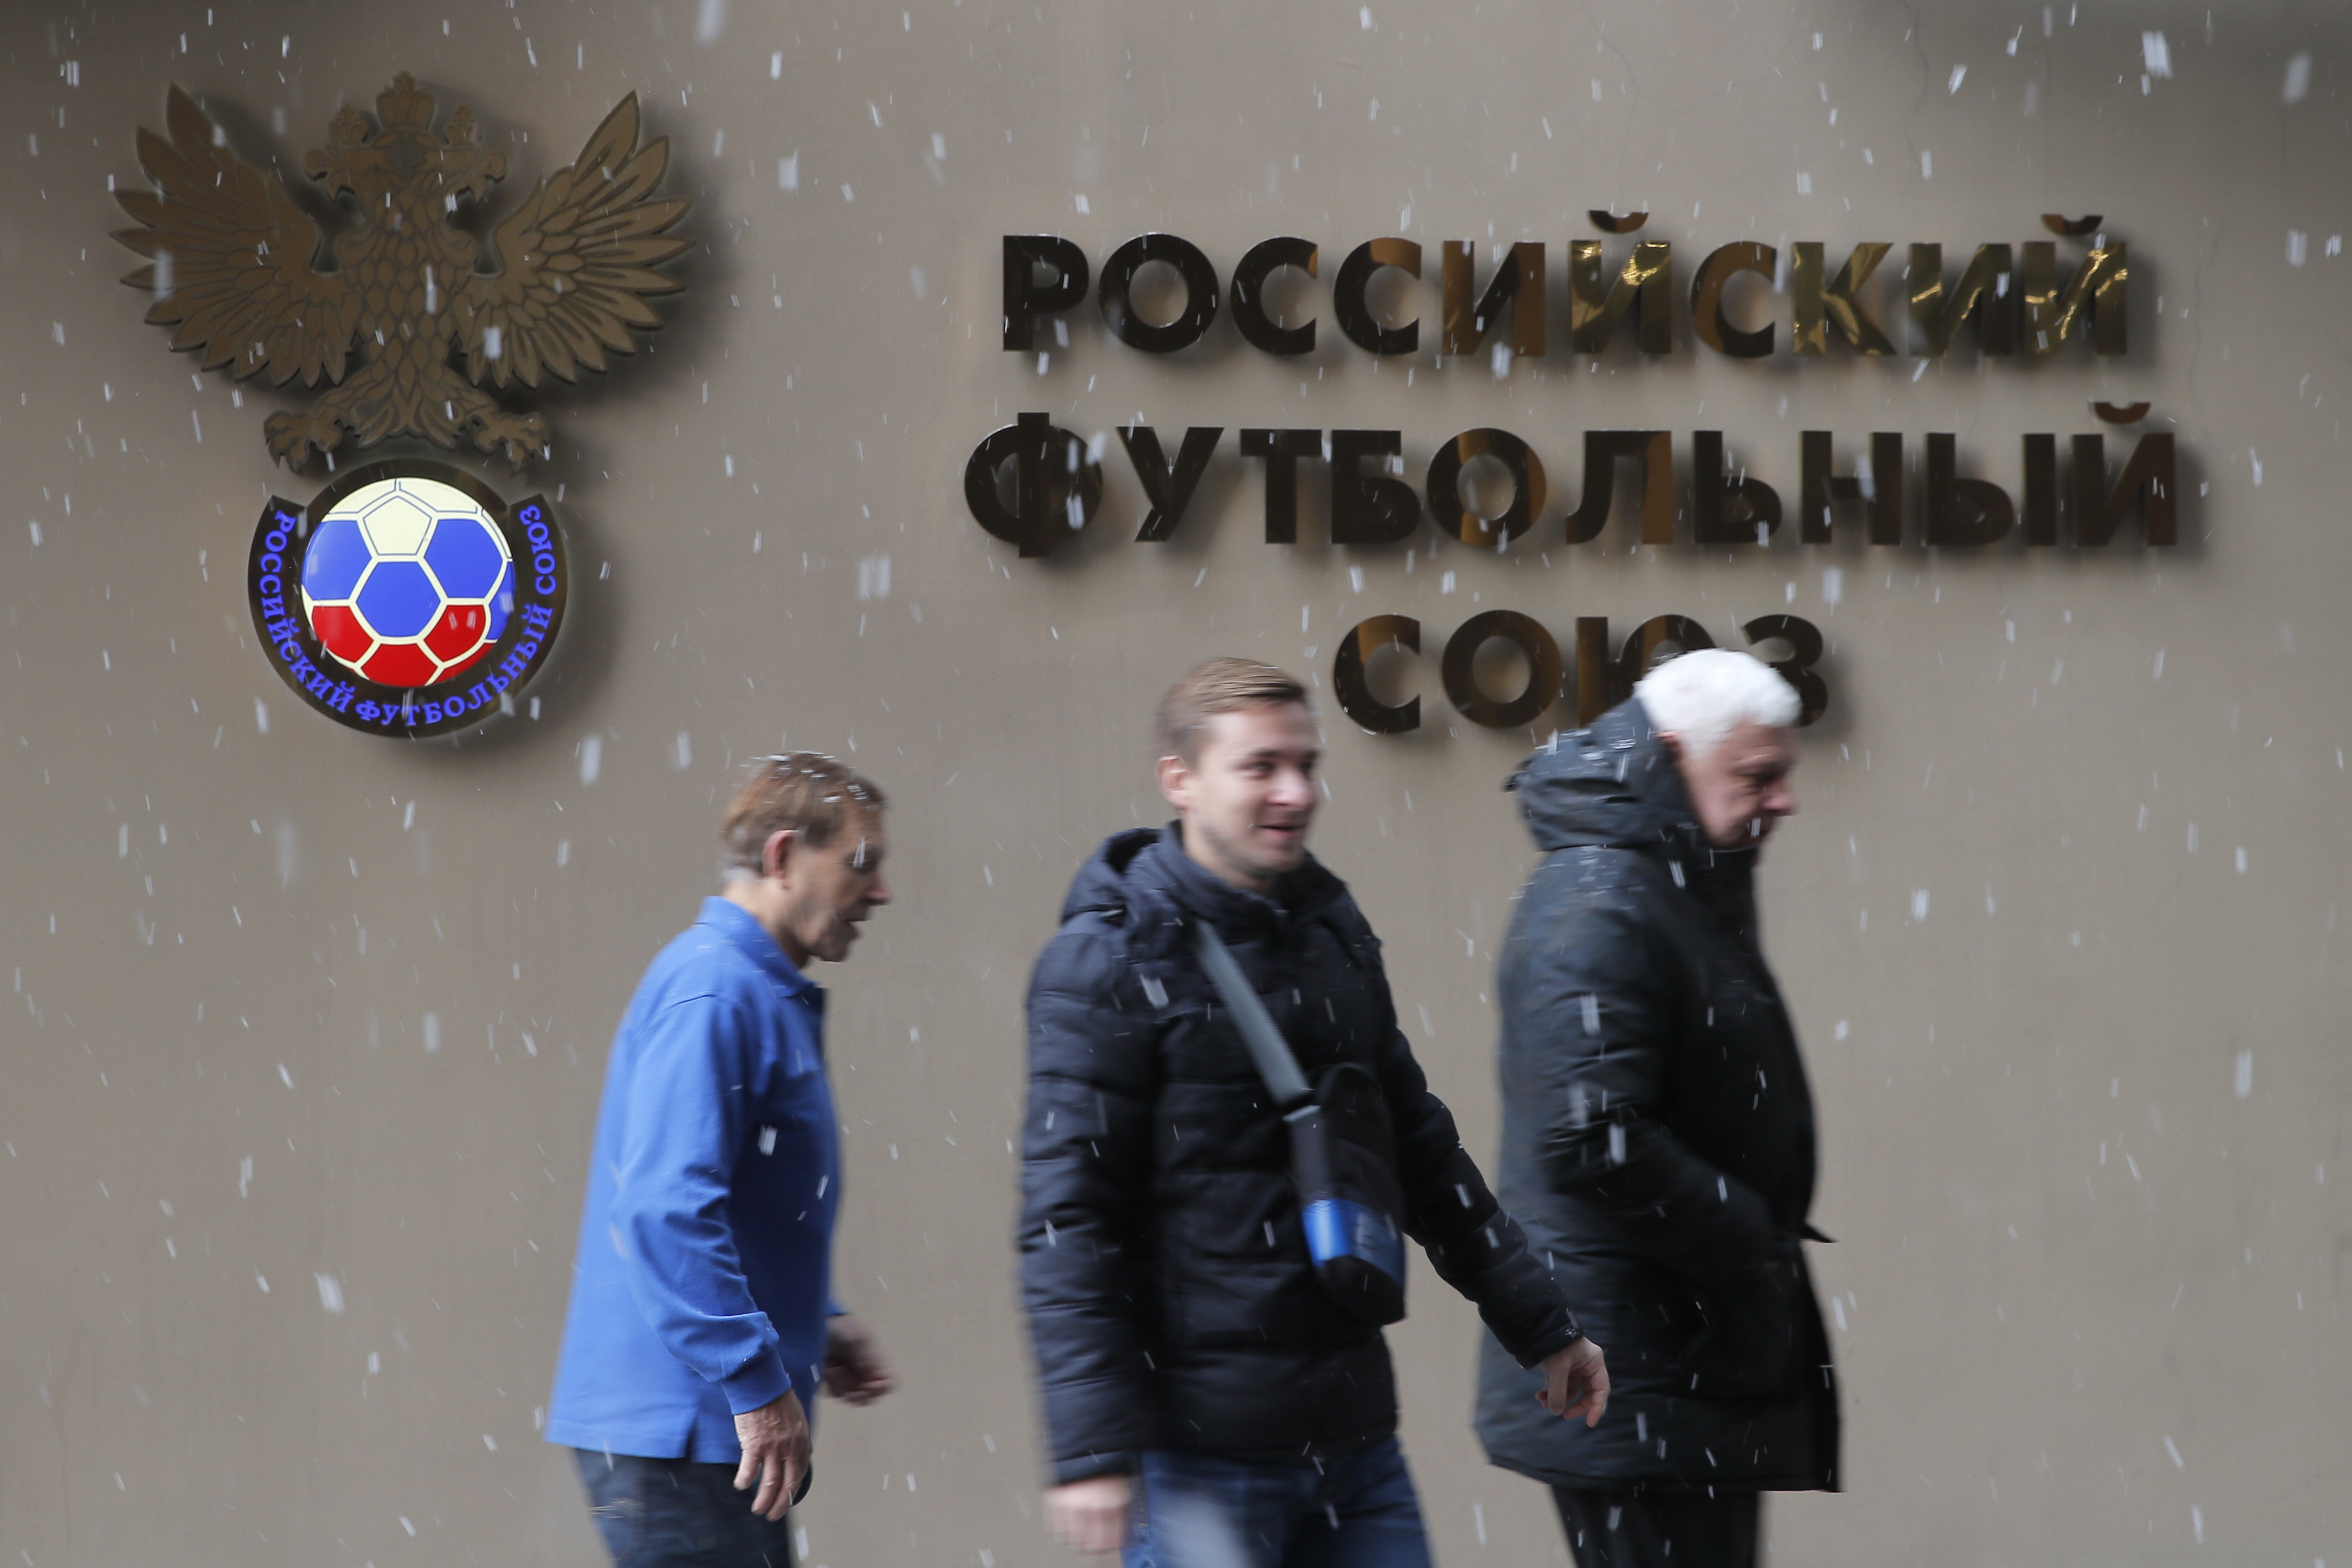 A Russian Football Union sign is seen during their meeting in Moscow